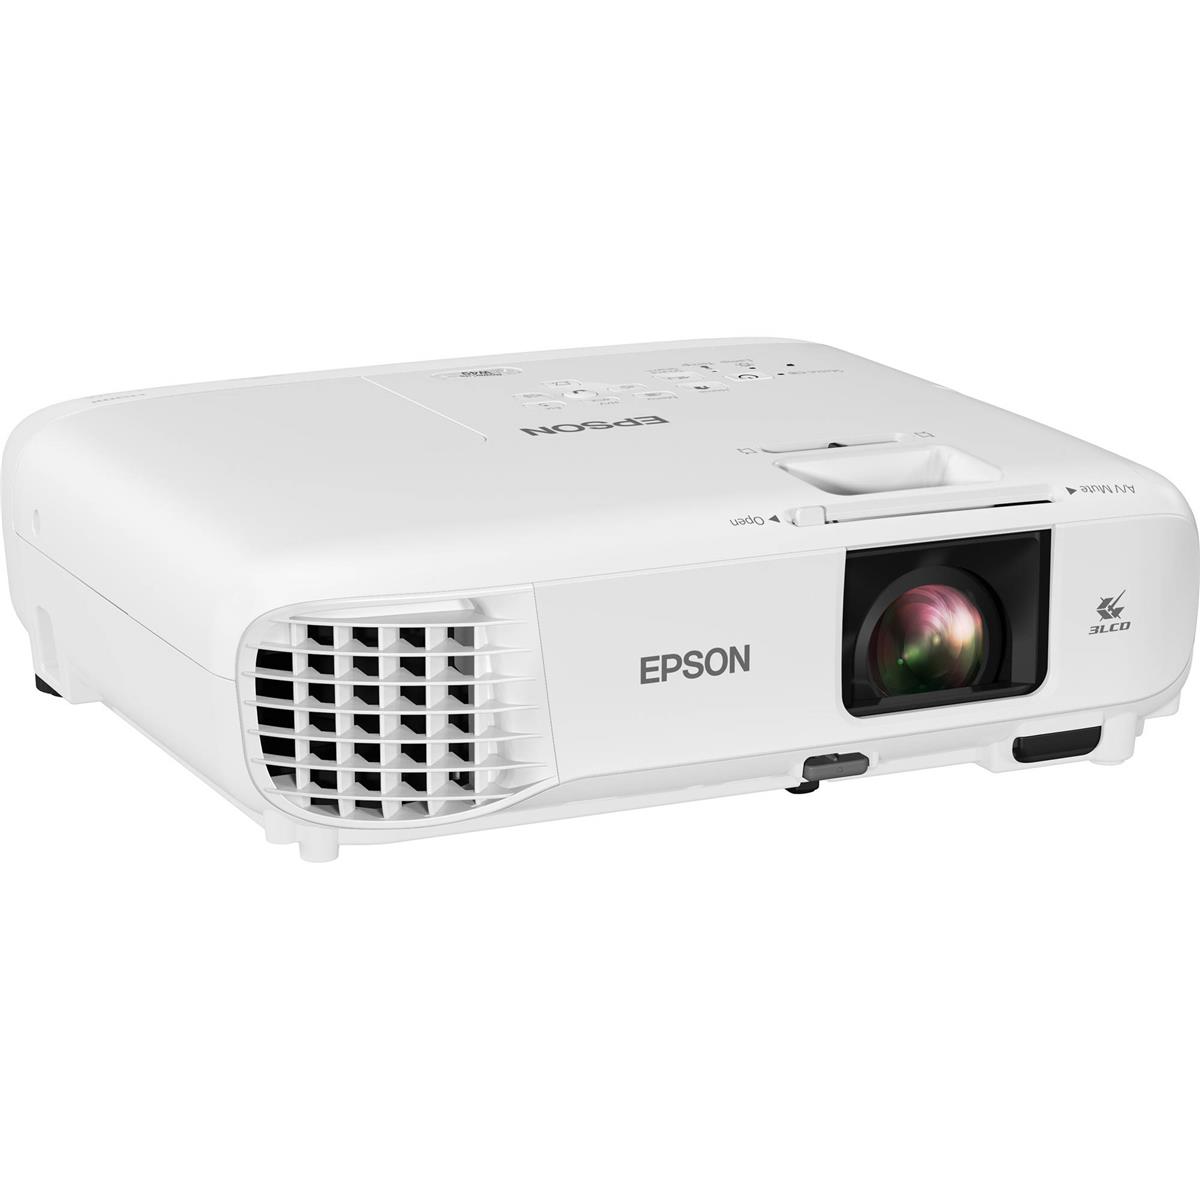 Image of Epson PowerLite W49 WXGA 3LCD Classroom Projector with HDMI